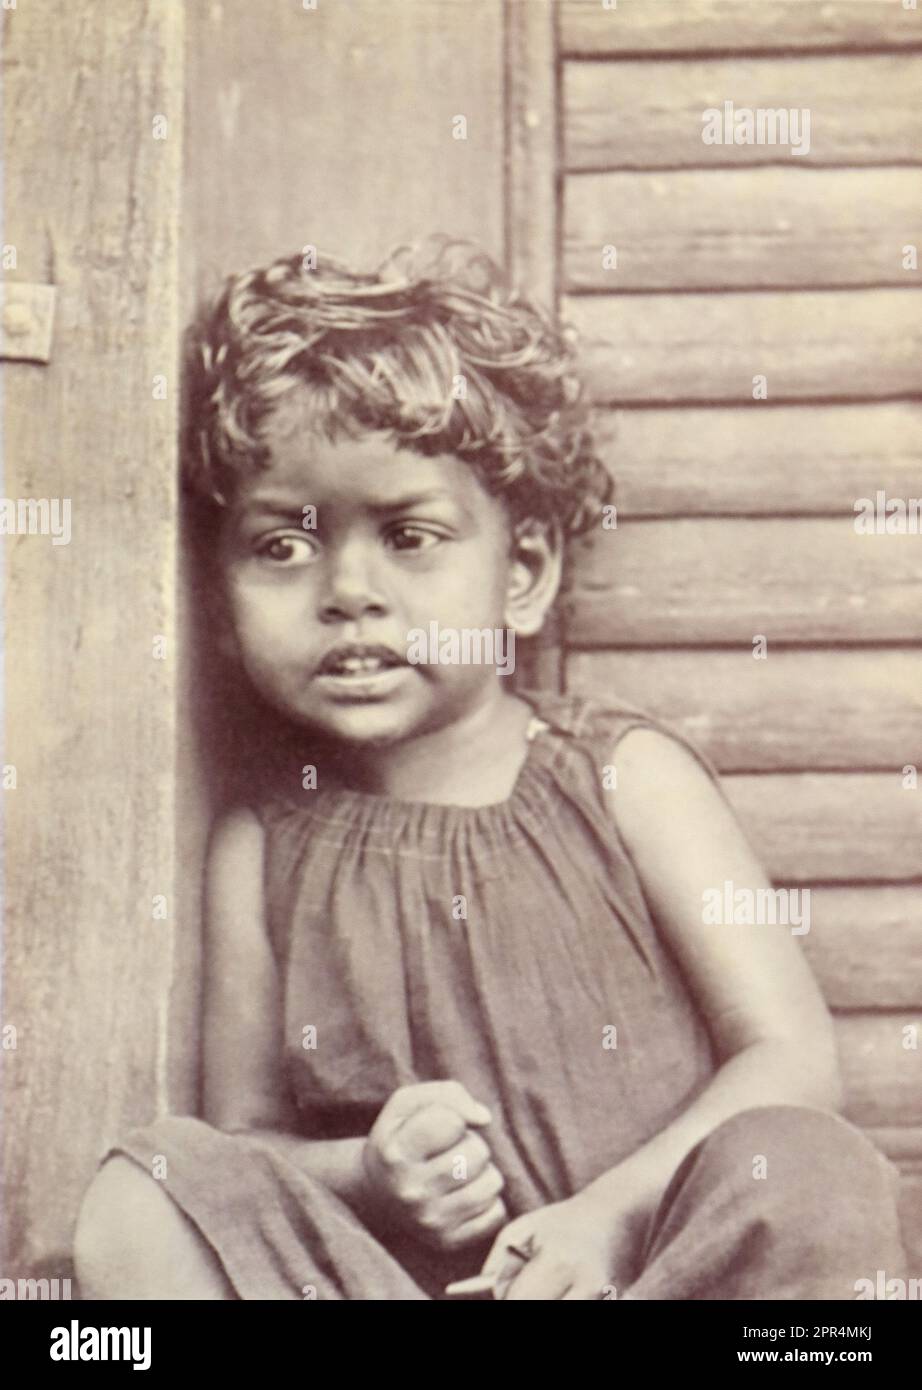 A shy girl watching the photographer with some suspicion. In the Dohnavur compound. Half-tone engraving from a photograph by Mr. Penn of Ootacamund (now known as Ooto), in the Tamil Nadu region of Southern India, c1912. The image relates to the Church of England Zenana Mission’s nursery and compound in Dohnavur, also in Tamil Nadu and about thirty miles from the southern tip of India. The compound was run by Amy Wilson-Carmichael and sought to promote Christianity among babies and children (at the time only girls, many who were victims of temple prostitution). Stock Photo